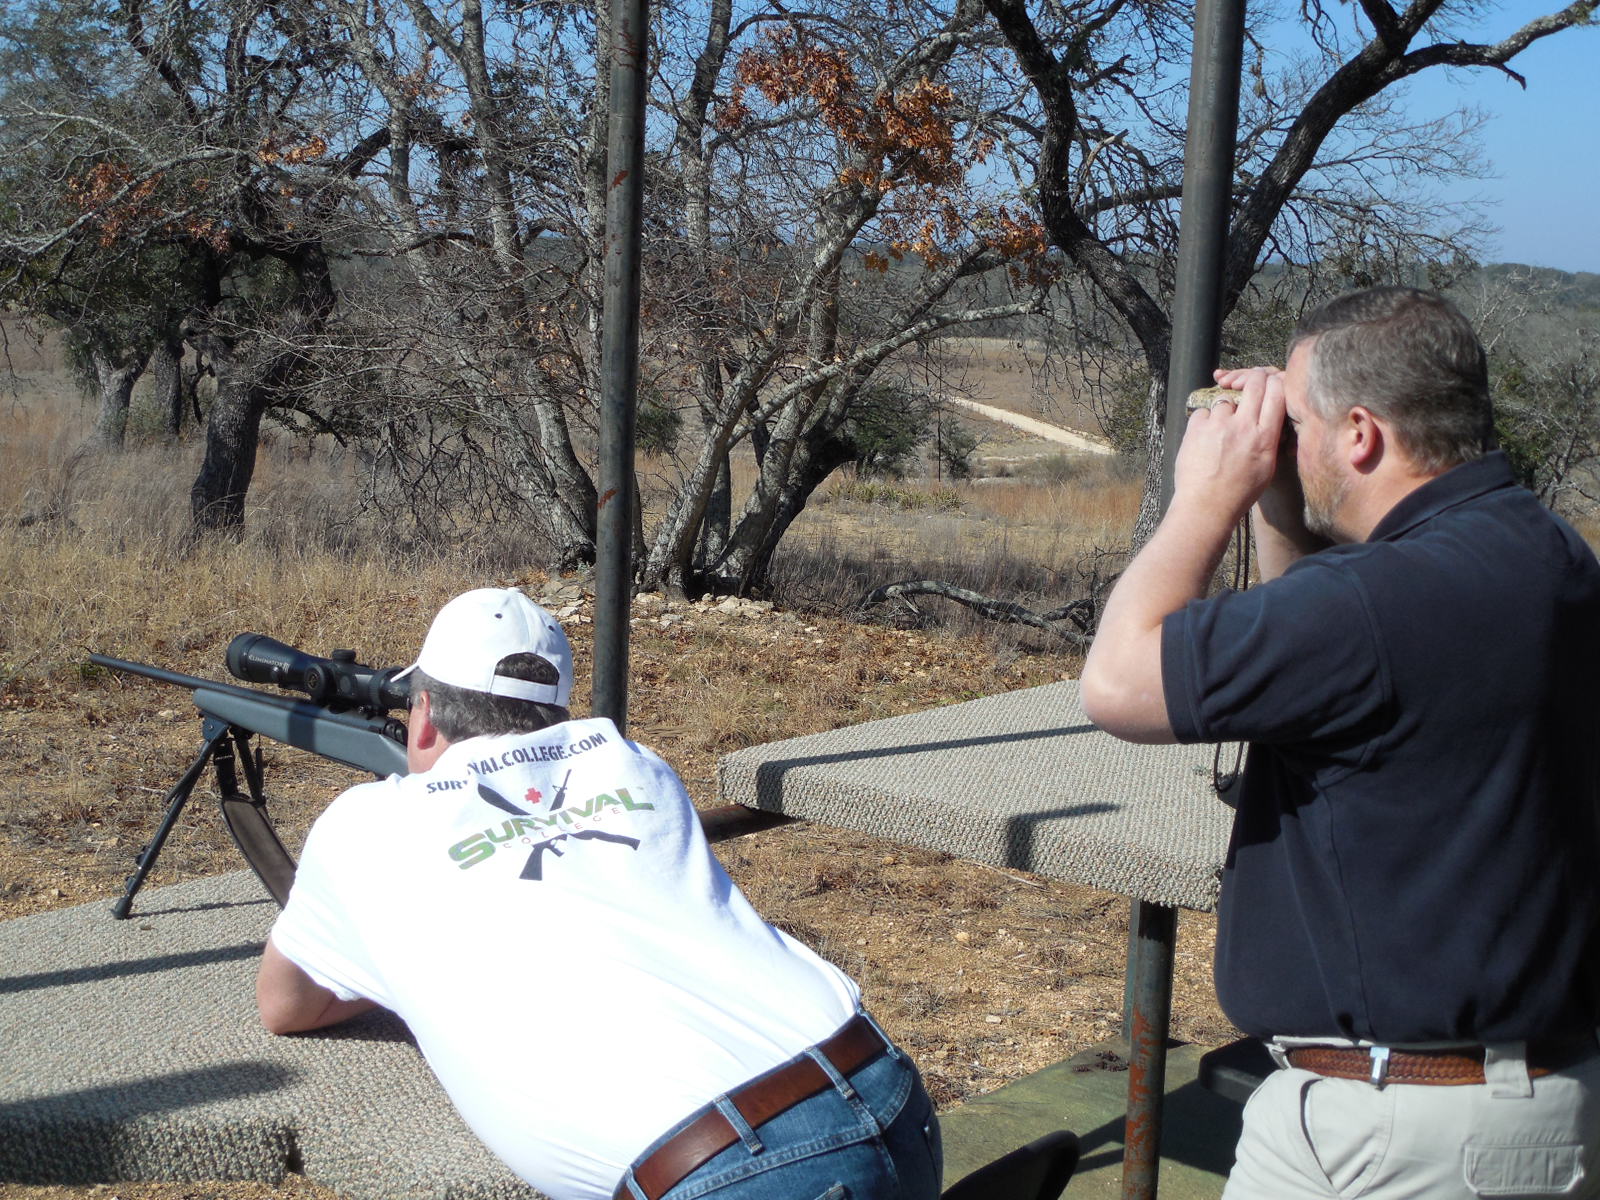 Ken Lewis formally with National Protective Services Institute also known as NPSI Training and currently with Prevent Prepare Protect Training and Consulting instructing a student during a Basic Rifle Instructor Class.